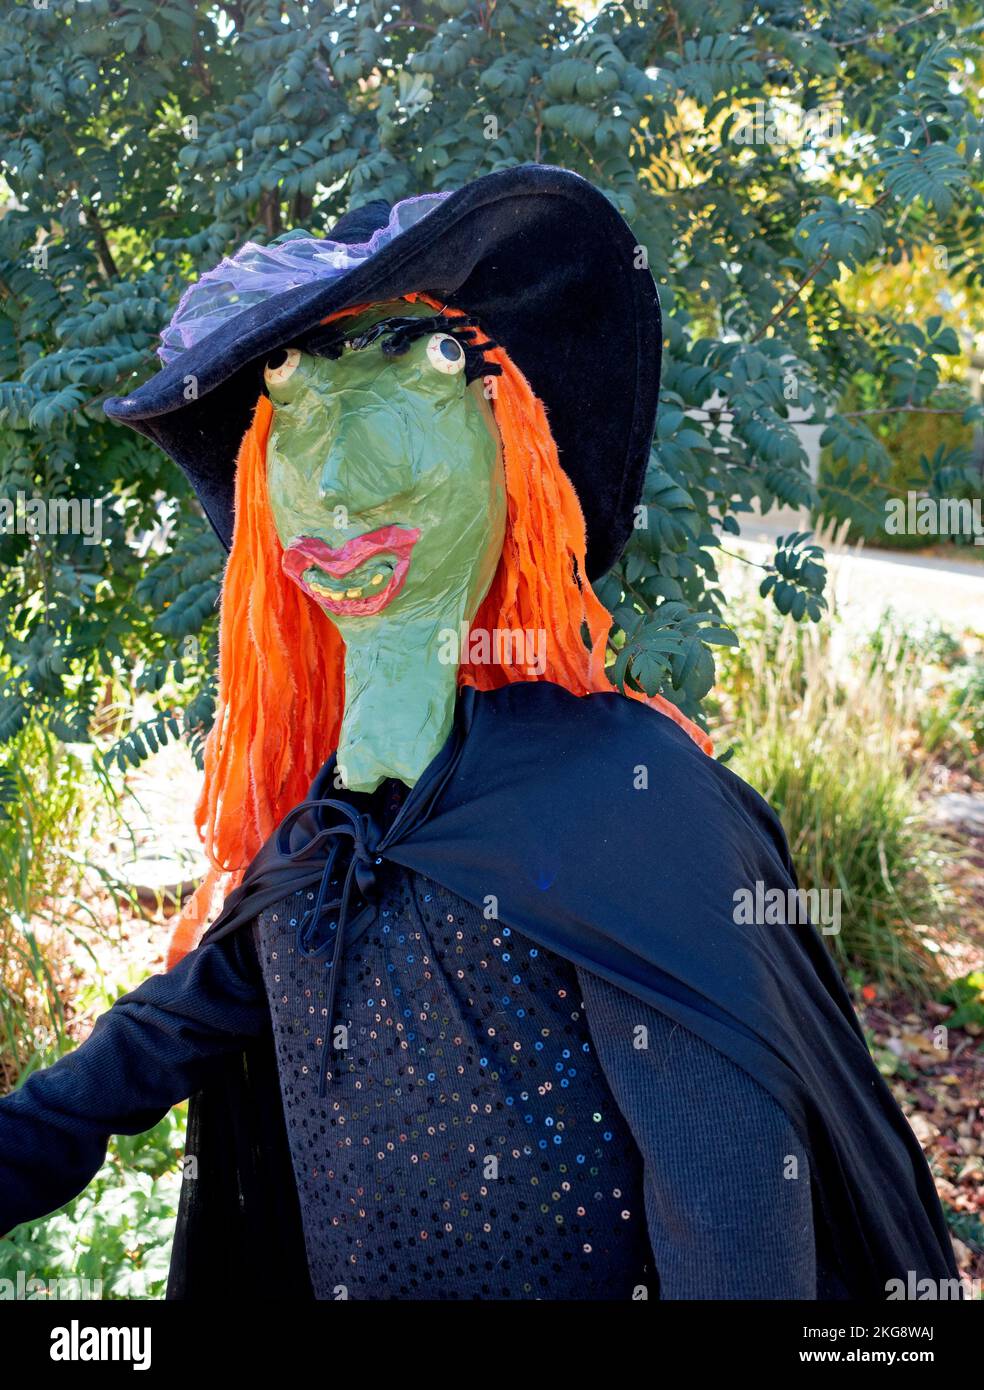 Portrait of a Halloween witch with green face, orange hair and black costume. Fergus Falls Minnesota MN USA Stock Photo